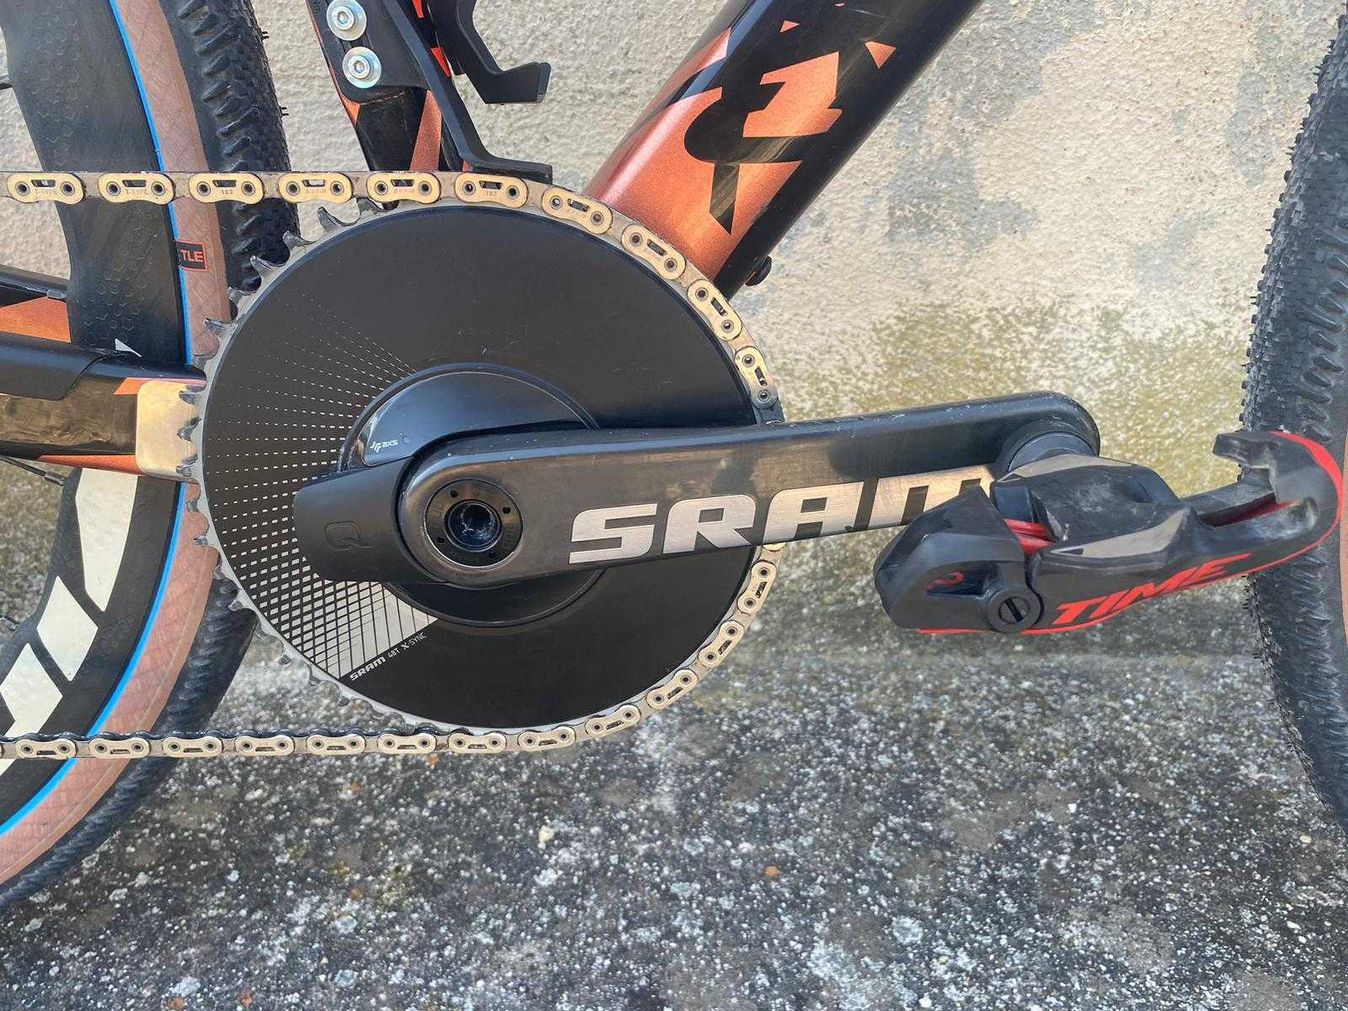 The 48t SRAM Red chainring was paired with a SRAM Eagle cassette